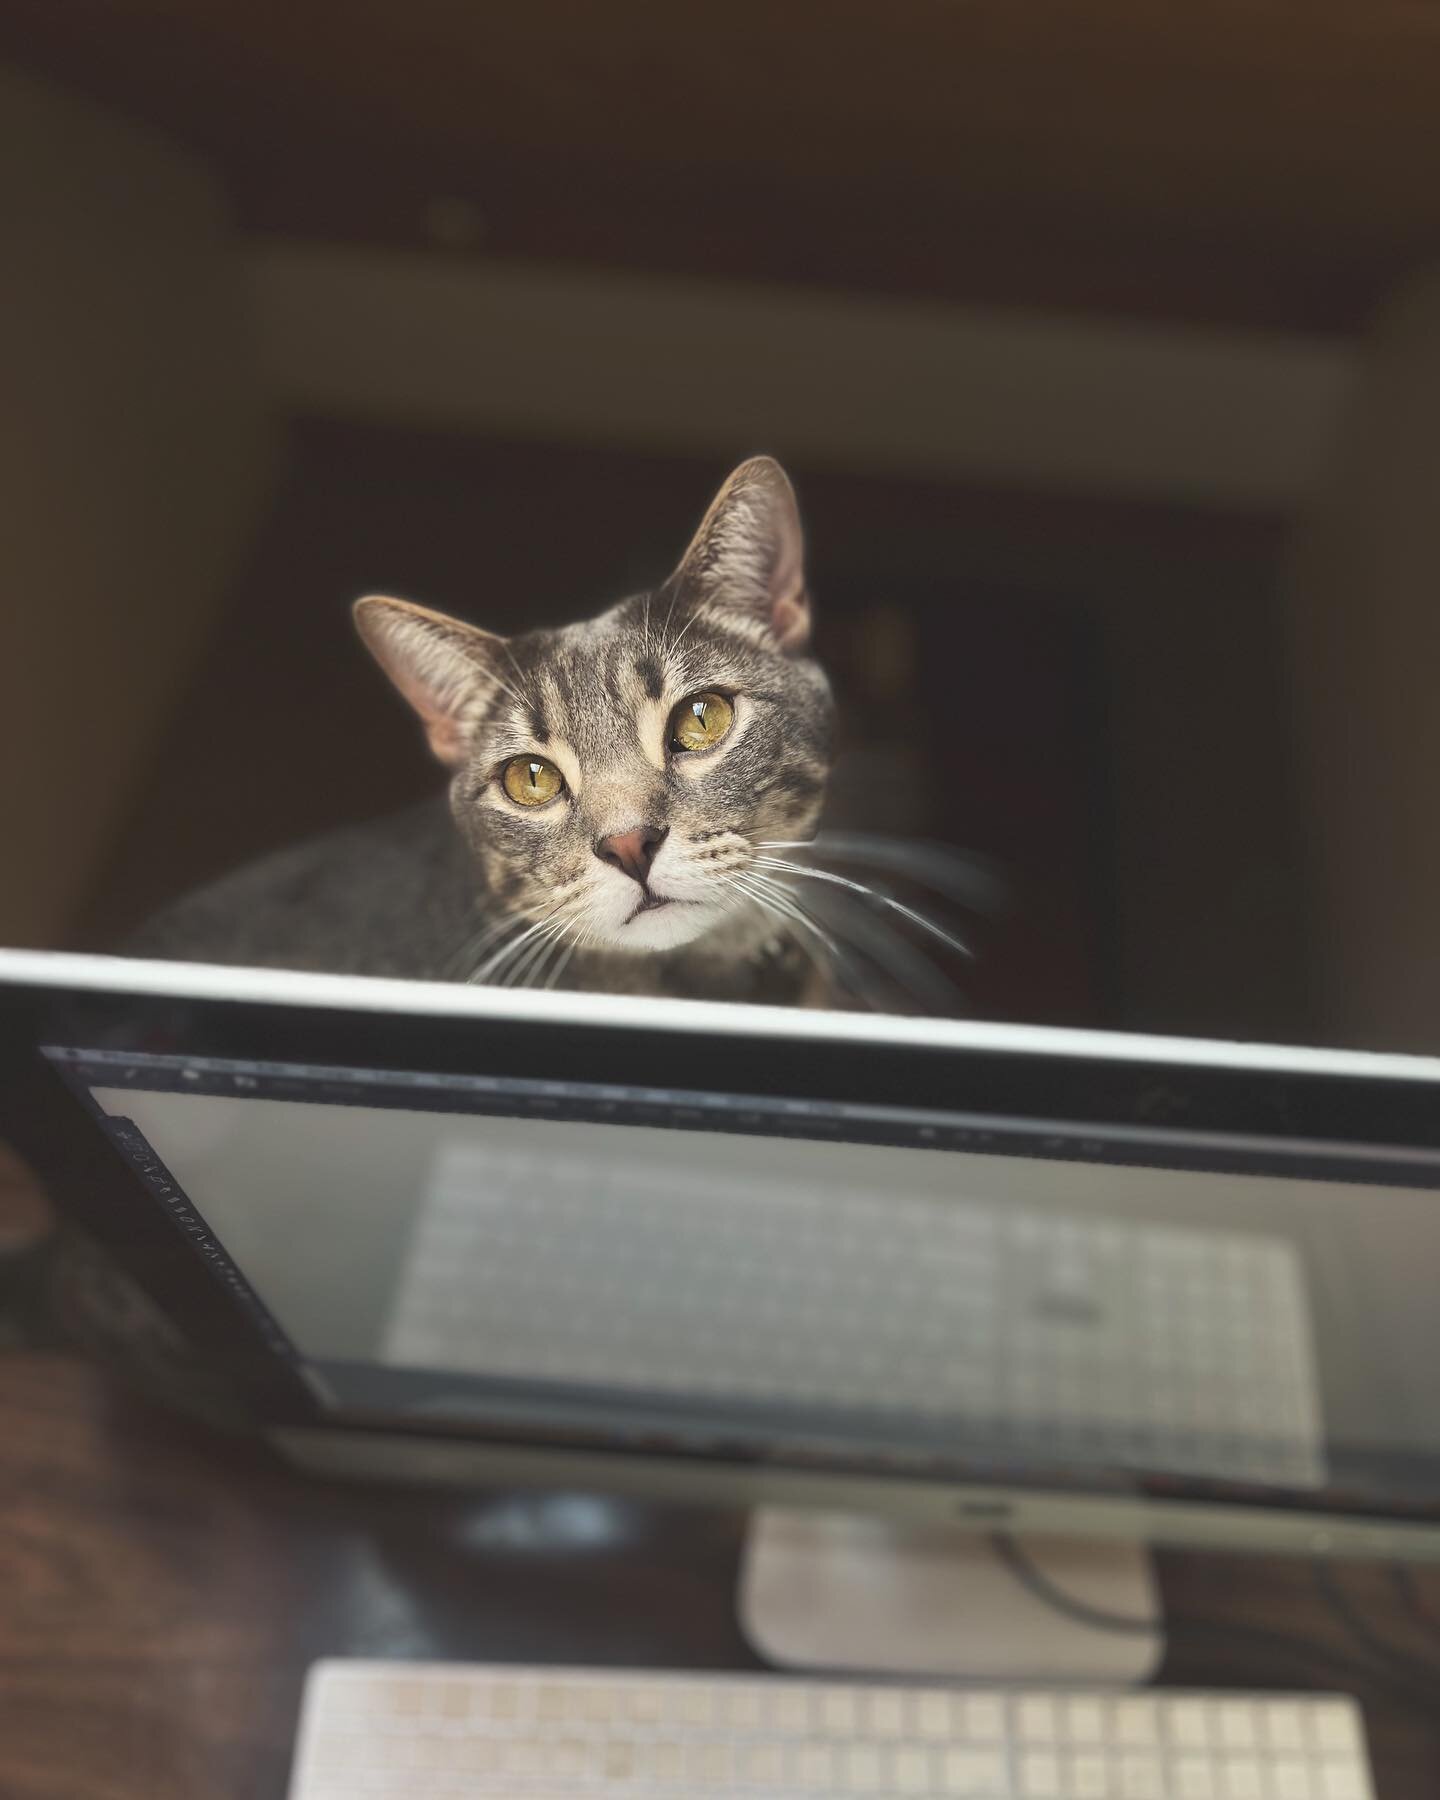 When I work from home, it&rsquo;s not without help. This is Iggy, aka &ldquo;Cutie Boy&rdquo; (a nickname bestowed by Peri).